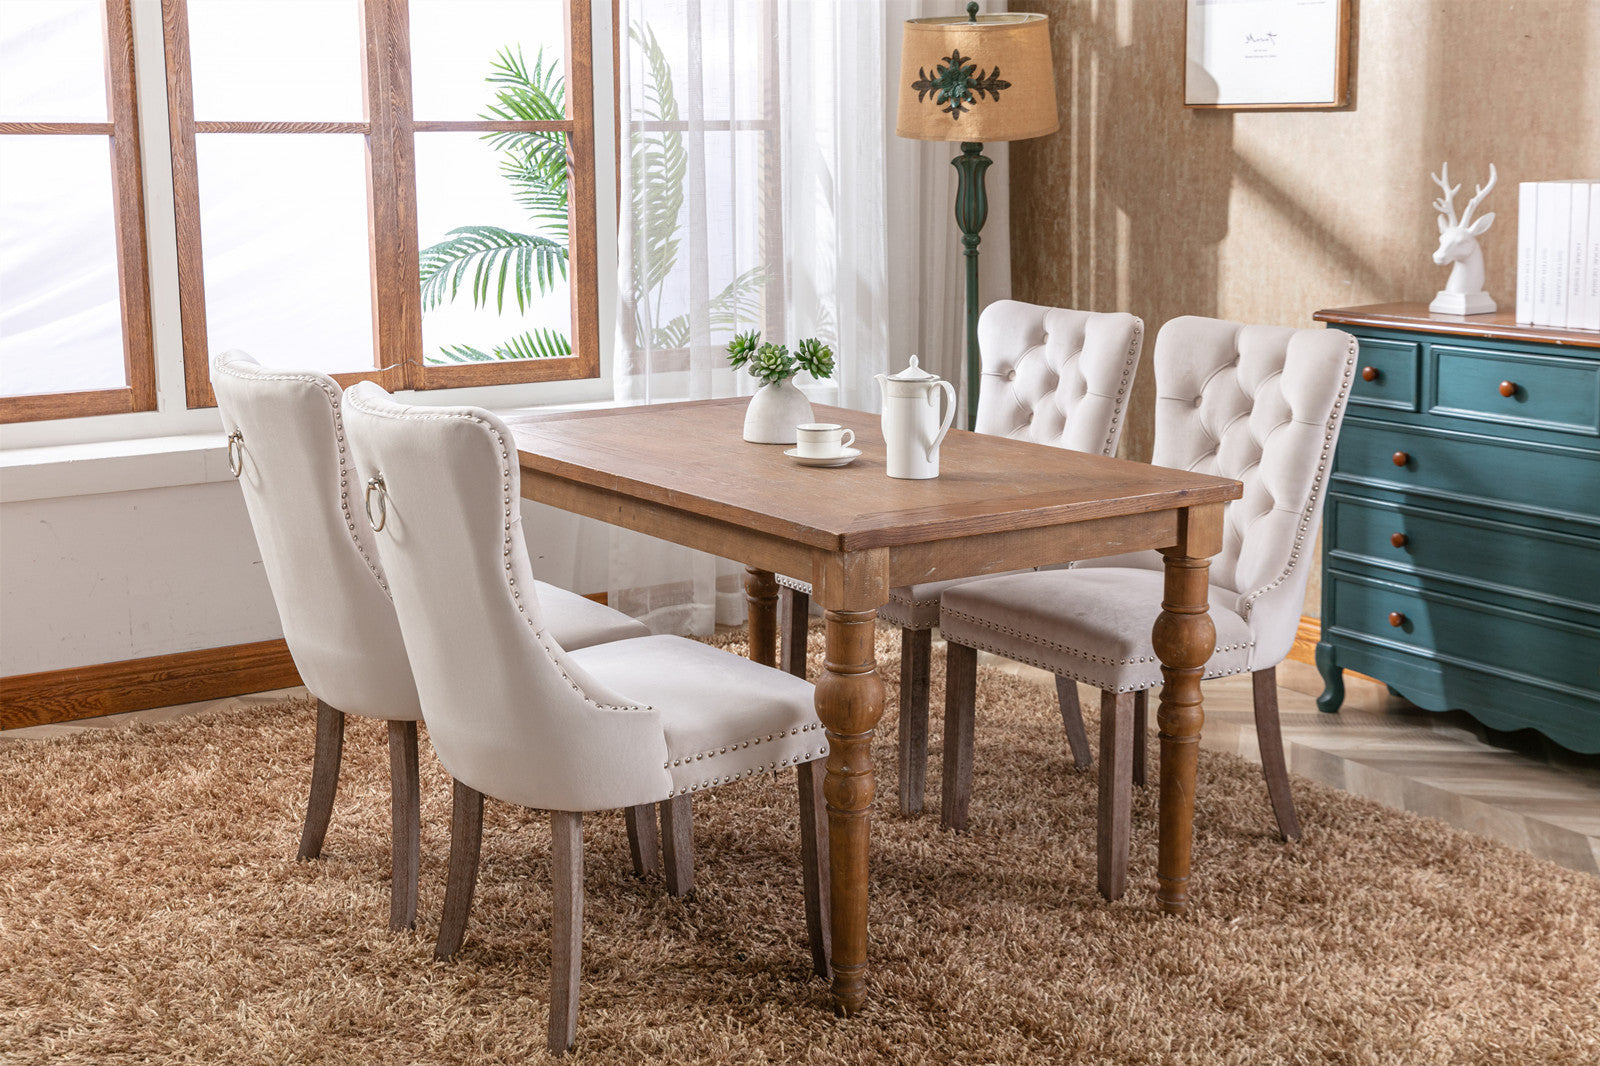 Modern High-end Tufted Velvet Upholstered Dining Chair with Wood Legs Nailhead Trim (Set of 2) -Beige